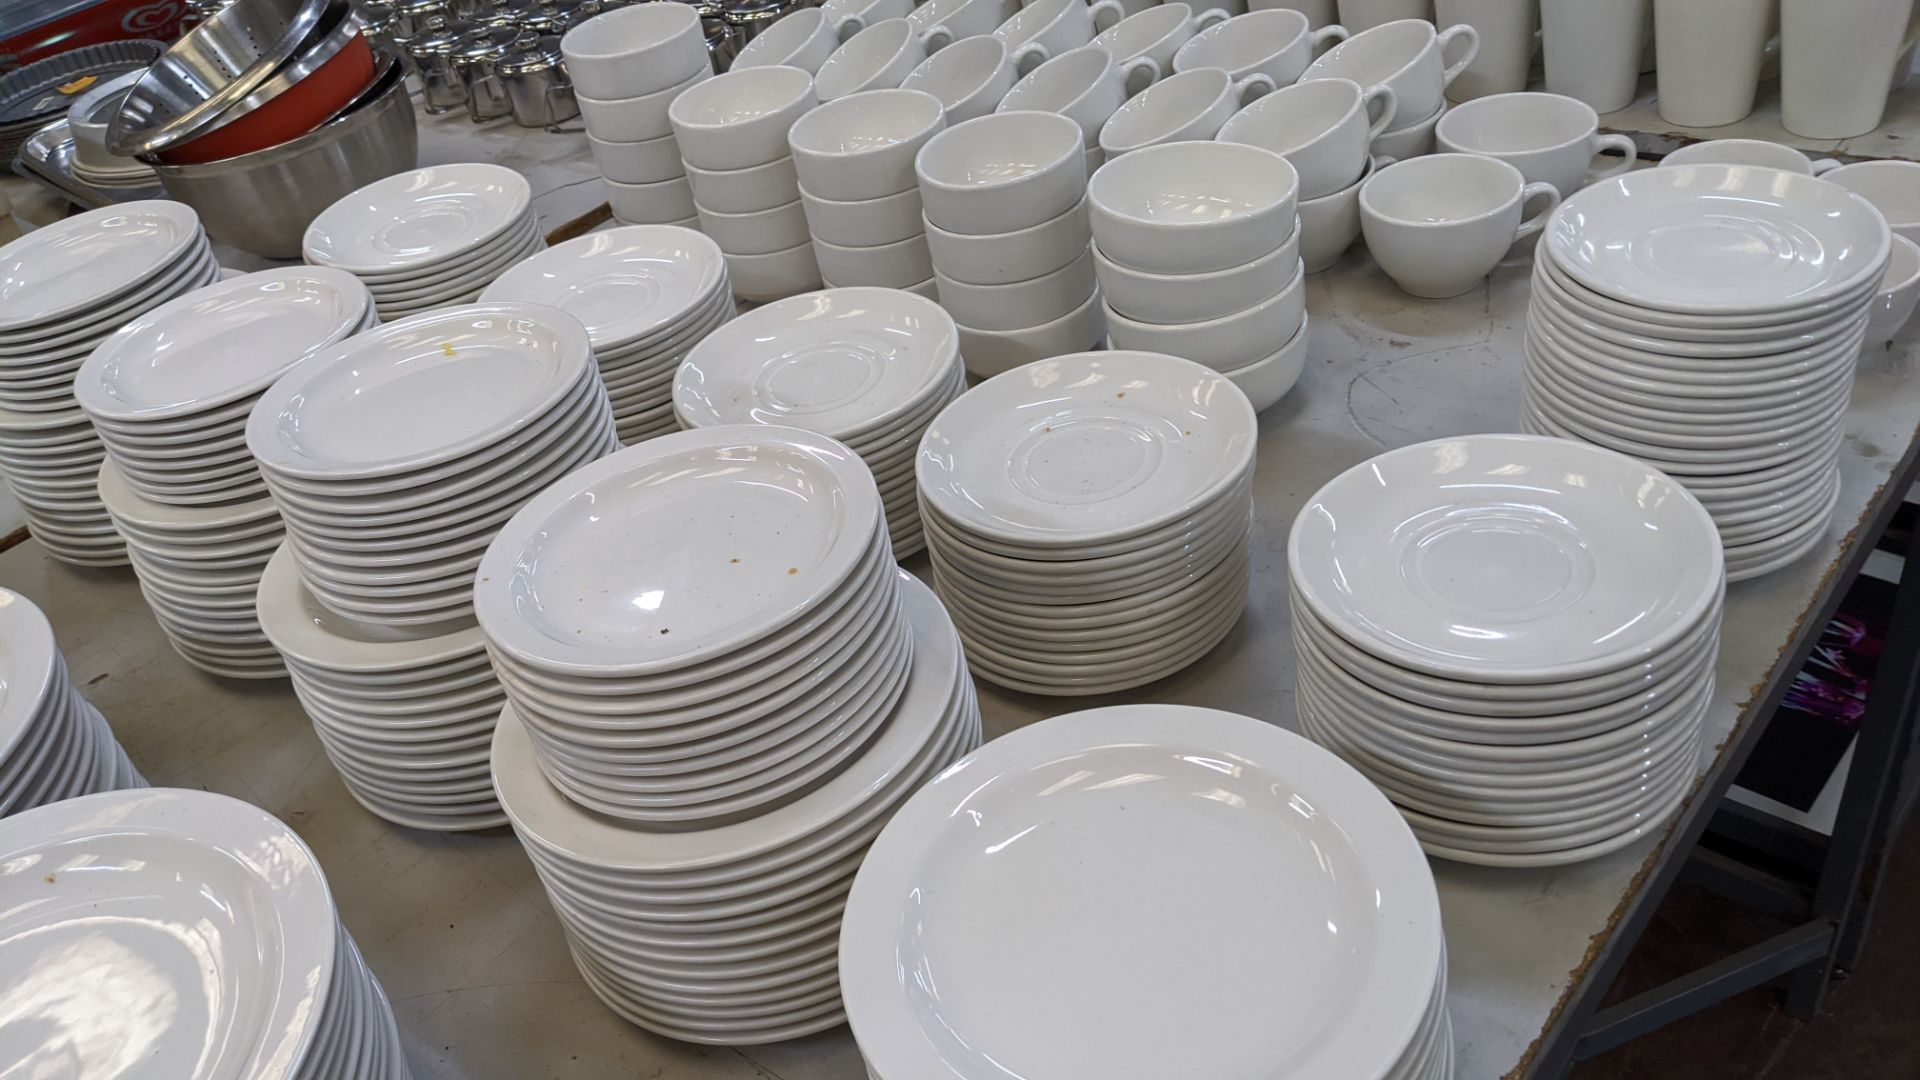 Large quantity of white crockery comprising oval & round plates plus saucers, bowls, cups, mugs & mo - Image 6 of 16